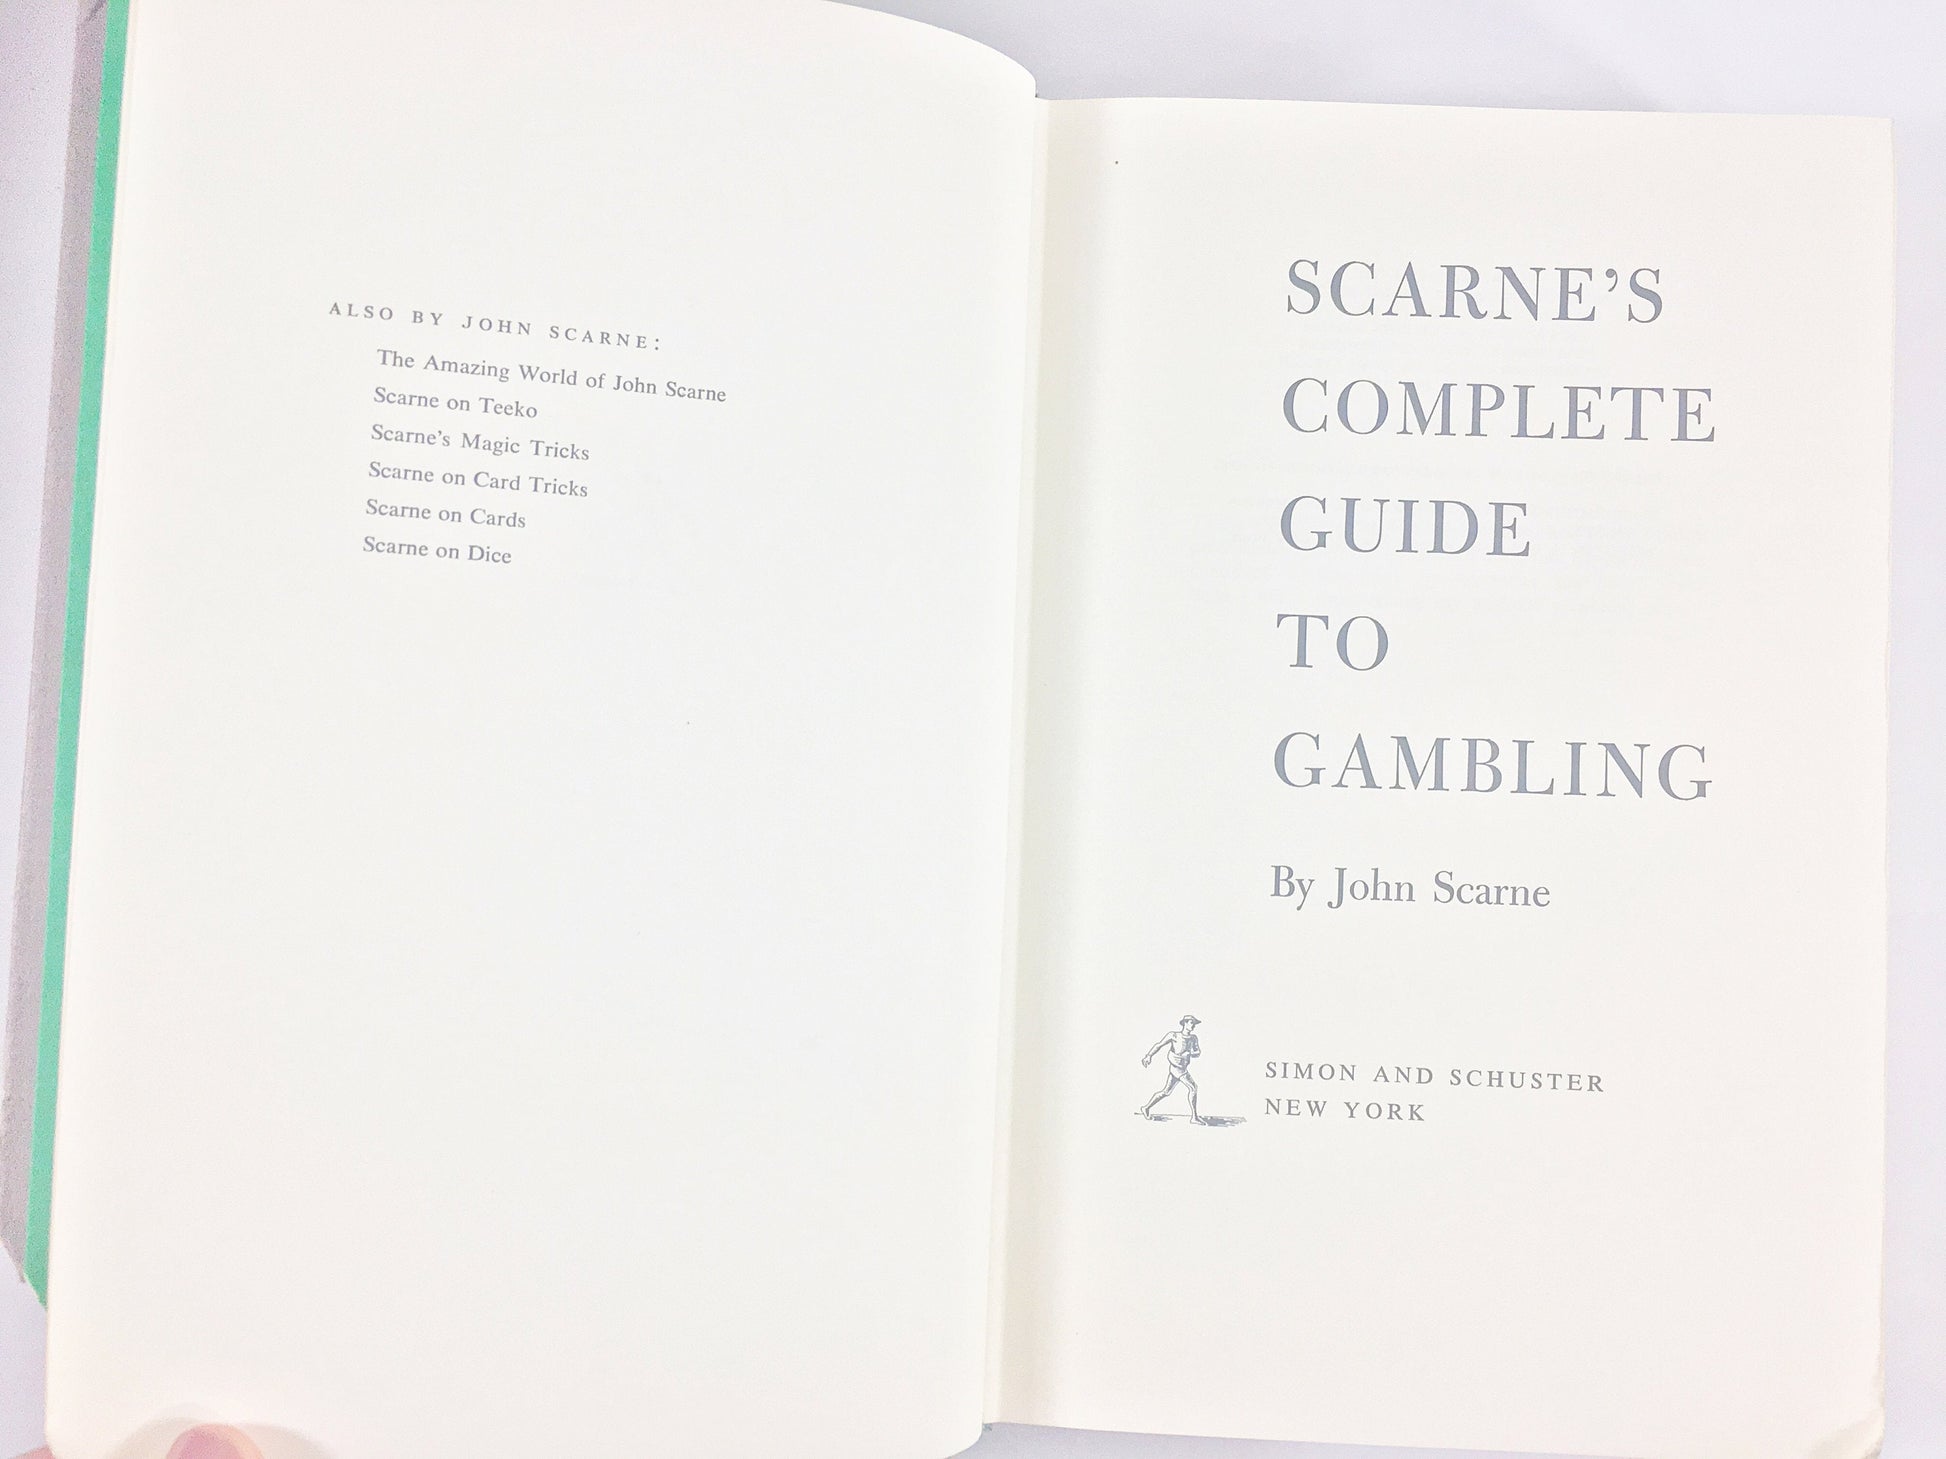 John Scarne's Complete Guide to Gambling FIRST EDITION vintage book circa 1961 by the foremost gambling expert. House percentages, strategy